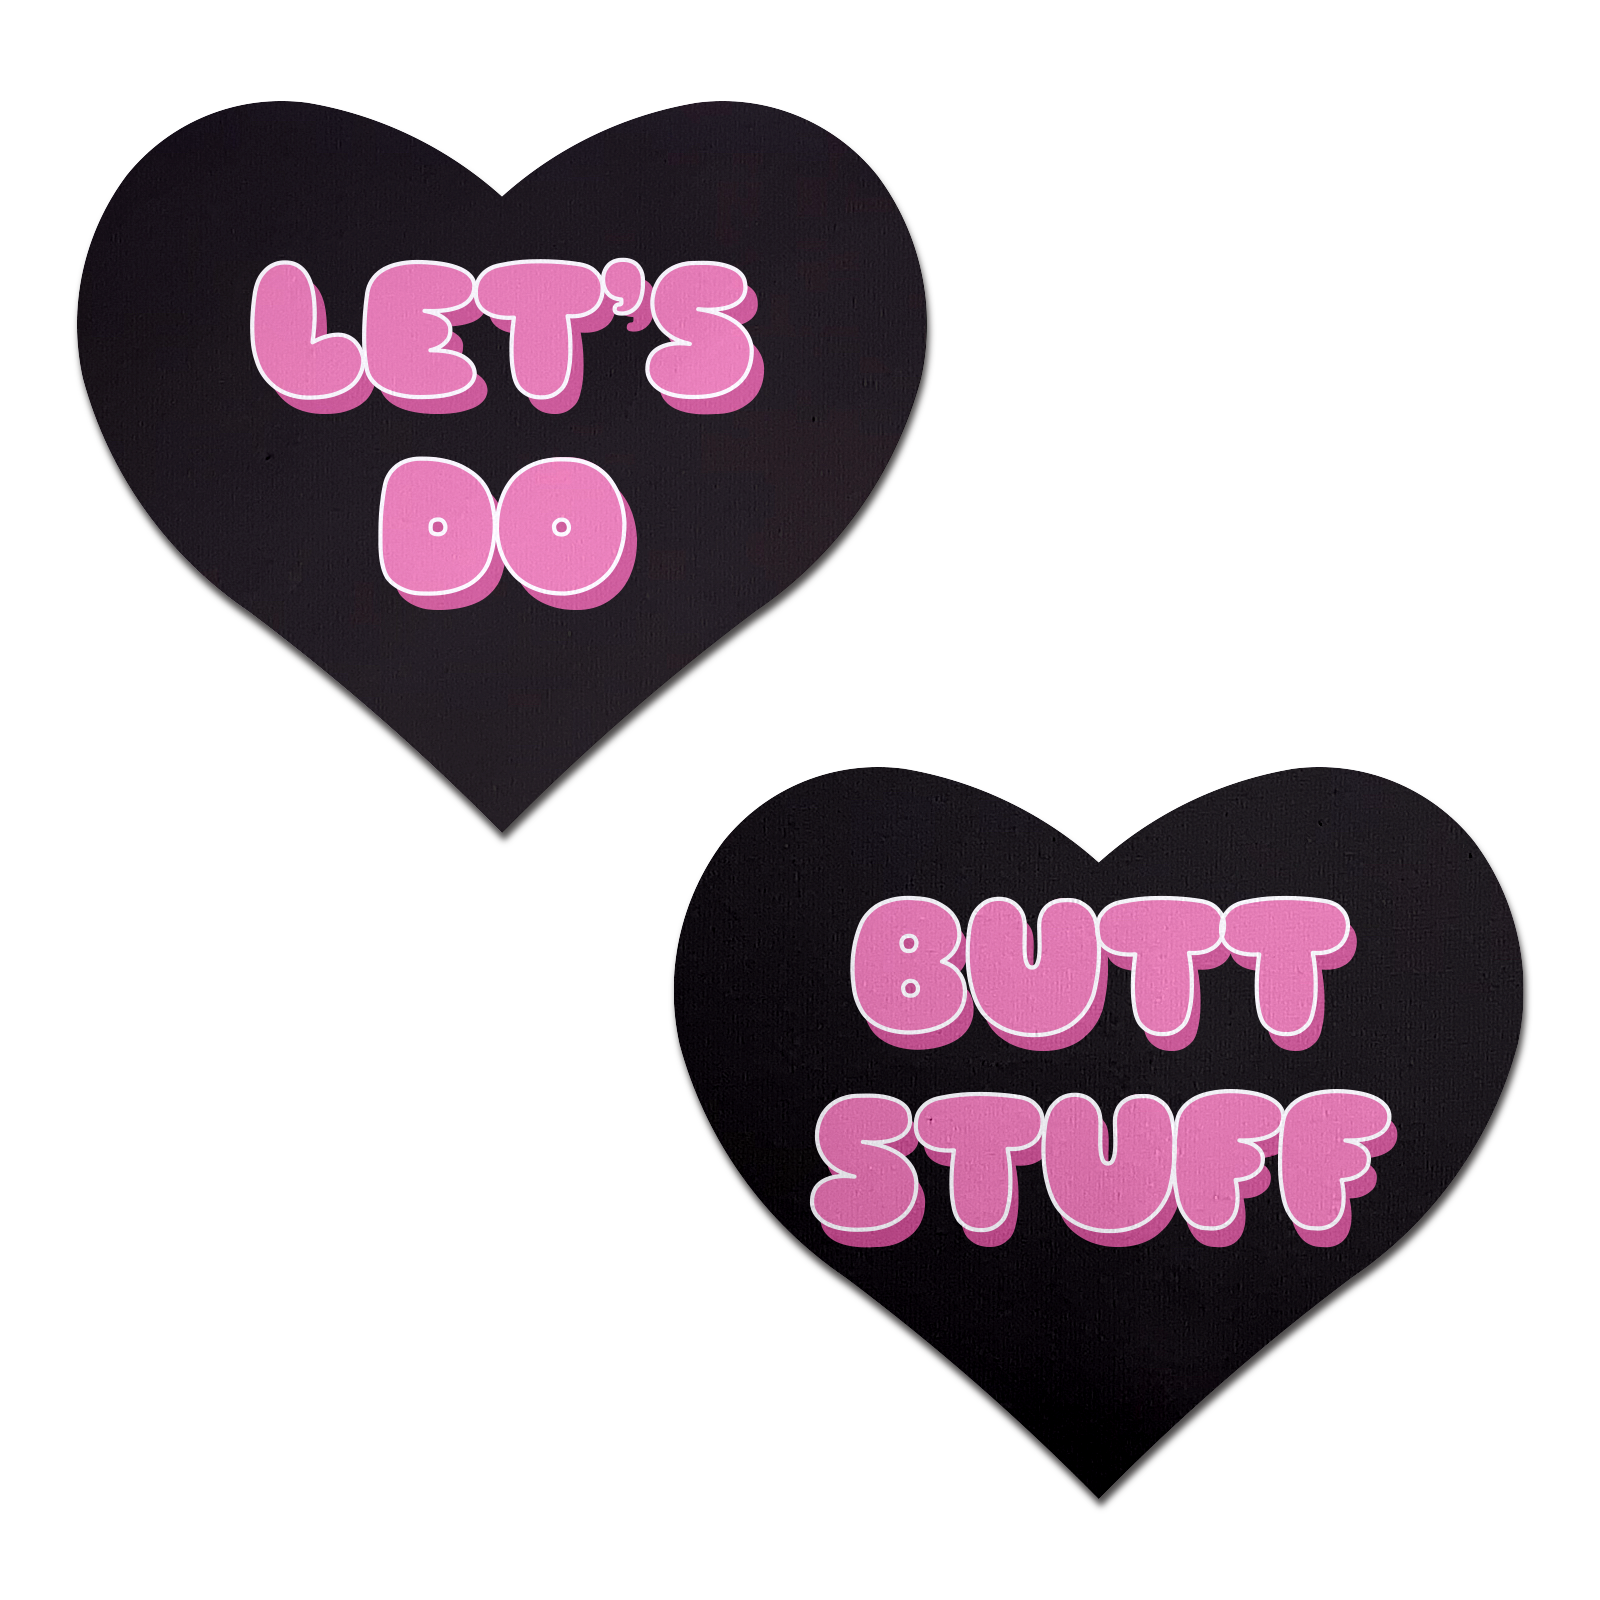 Love: 'Let's Do Butt Stuff' in Black & Pink Heart Nipple Pasties by Pastease®